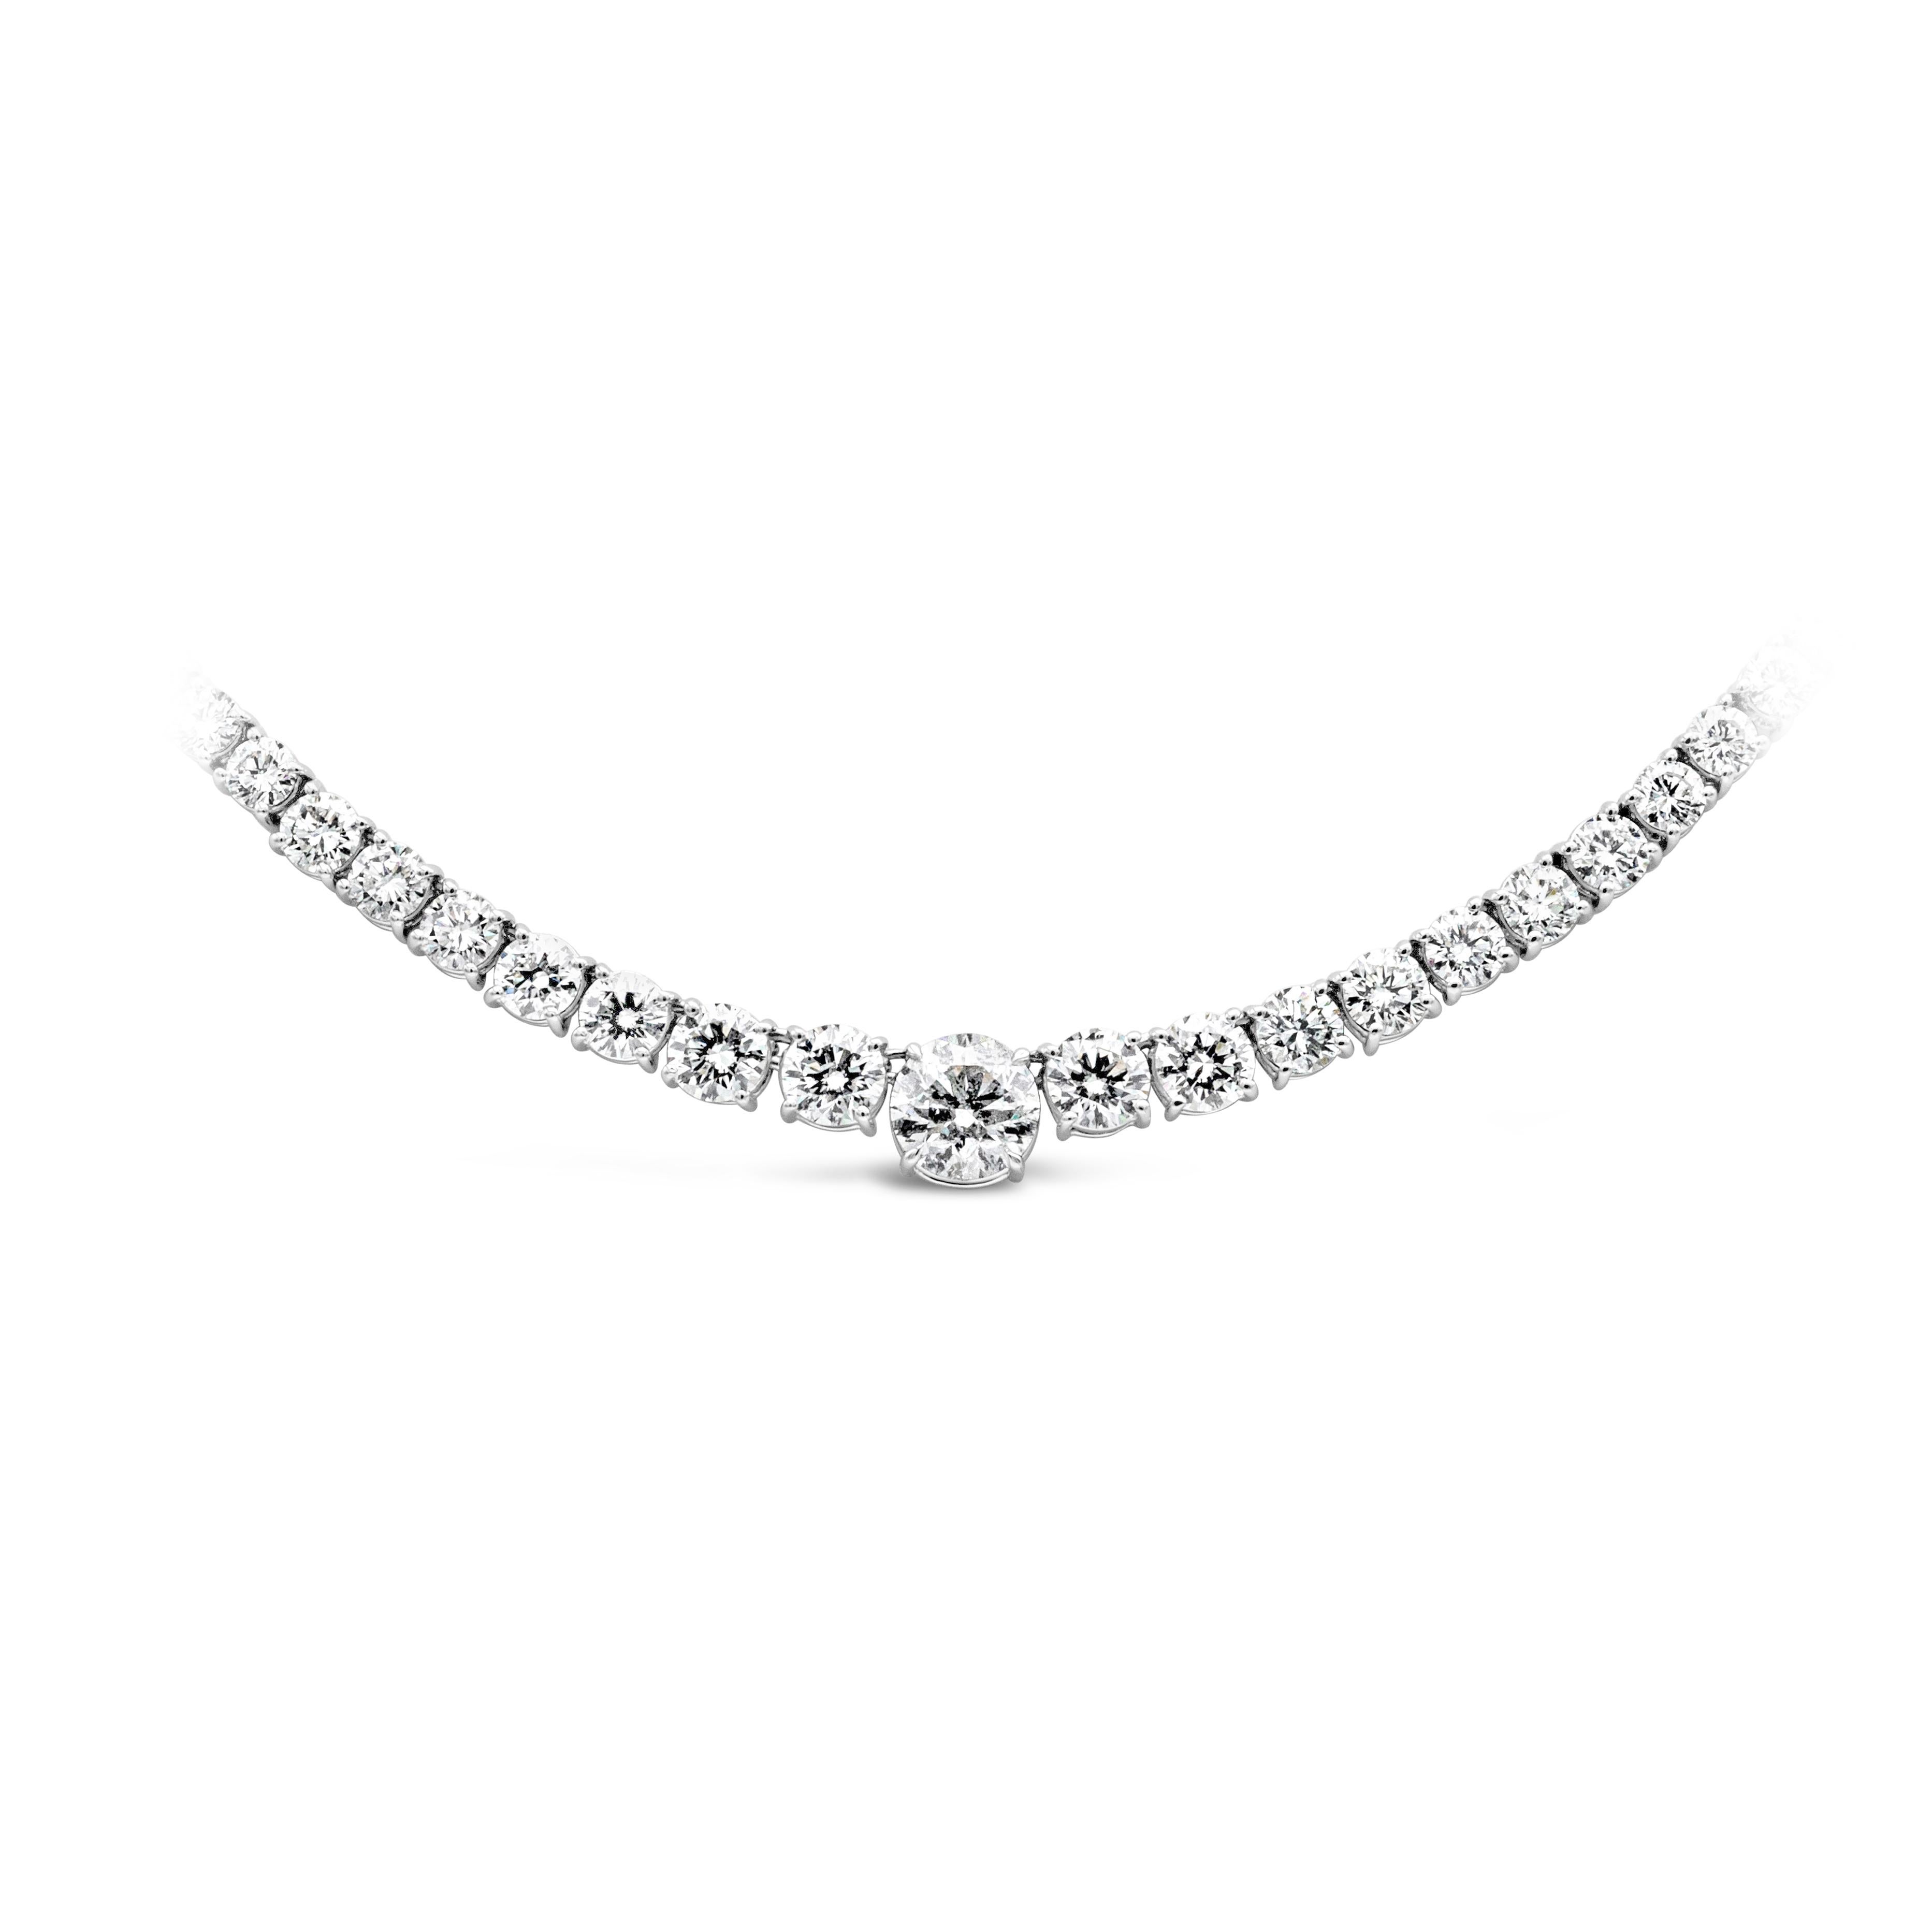  A brilliant and classic piece of jewelry showcasing a line of round brilliant diamonds that elegantly get larger to the center of the necklace. Largest diamond at the center weigh 2.02 carats and GIA certified as H Color and I2 in clarity while the